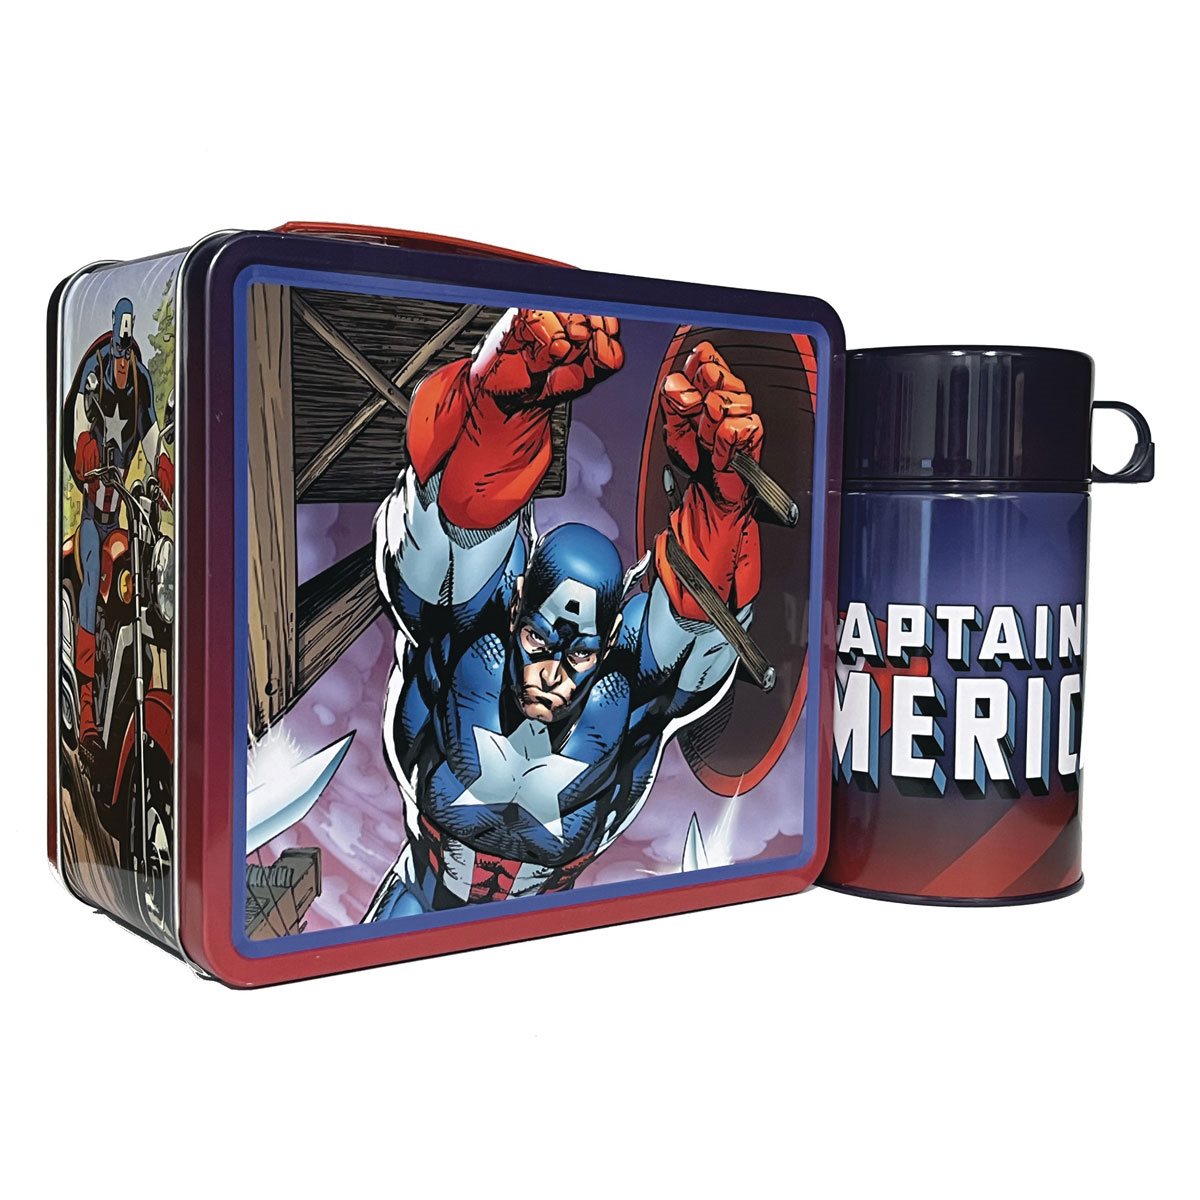 X-Men Giant-Size X-Men Tin Titans Lunch Box with Thermos - Previews  Exclusive